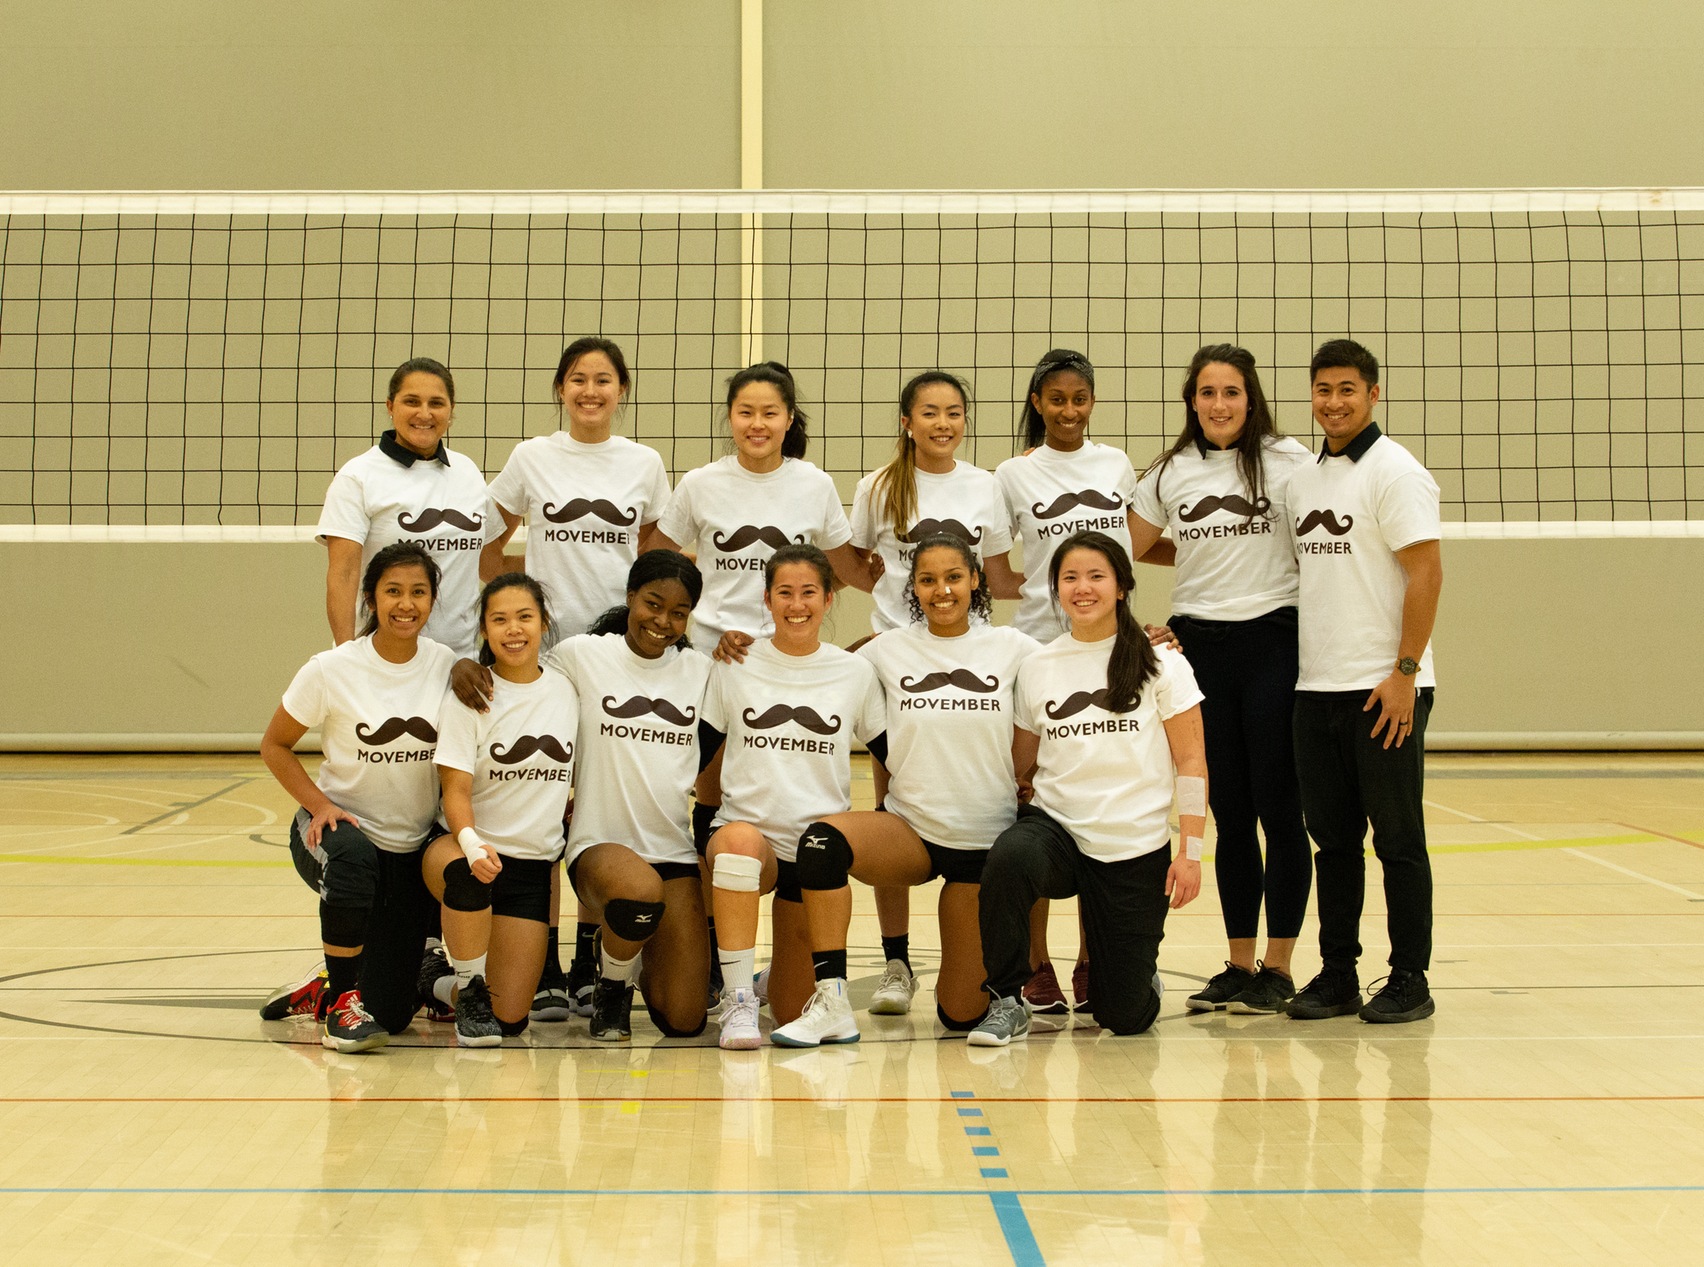 The women's team are all smiles as they take a group photo in their Movember shirts just before their game against the Huskies. Their smiles grew bigger after defeating George Brown in straight sets. (Nicole Ventura/Colts Media)